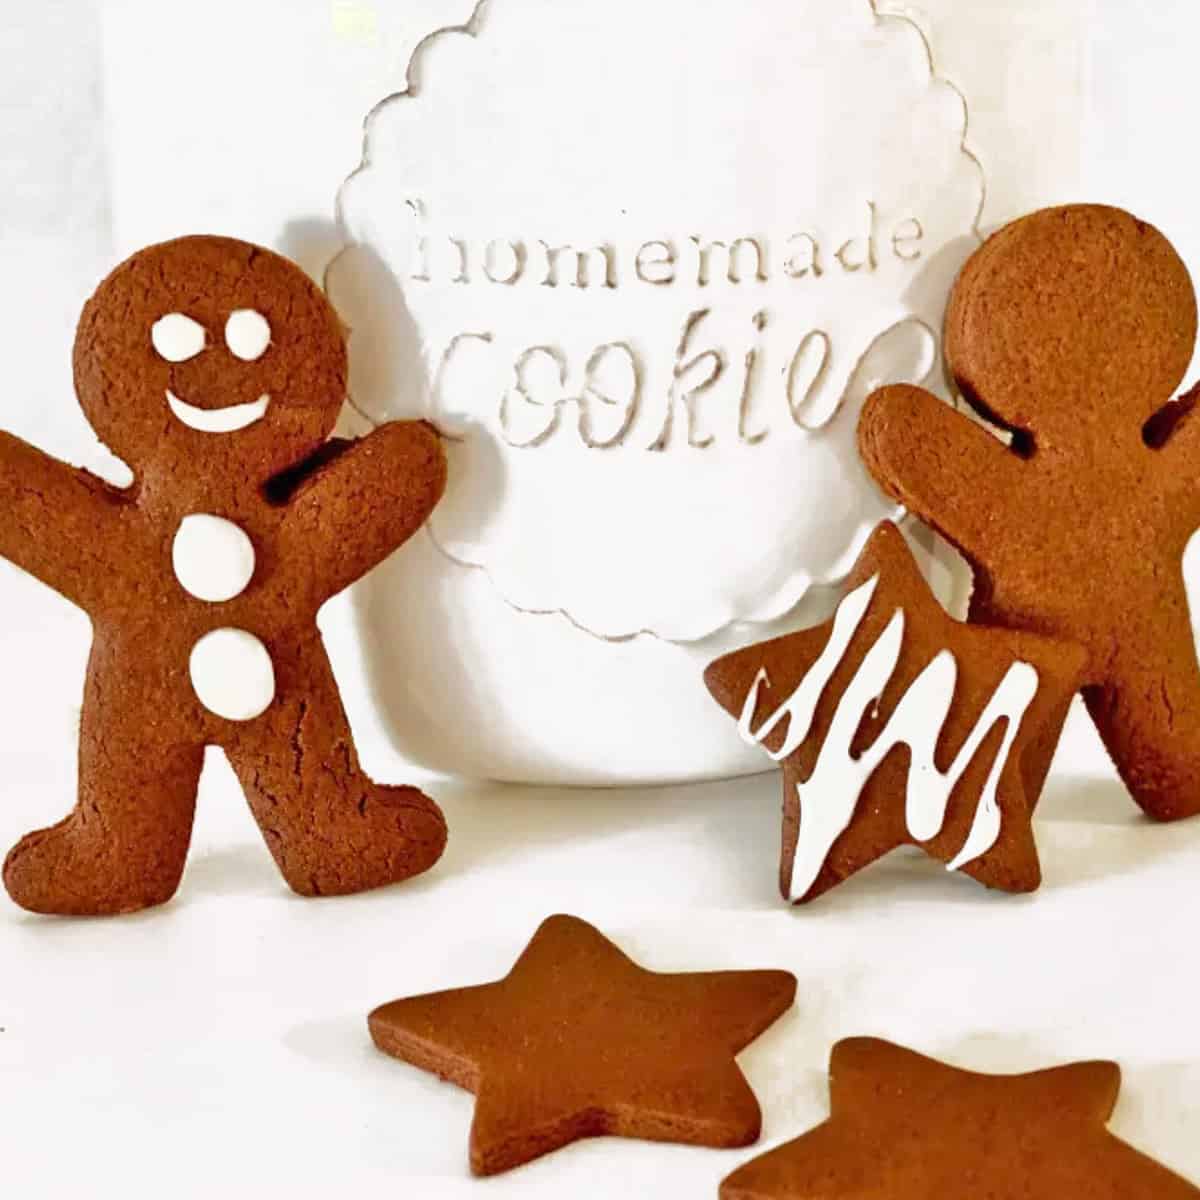 Some gingerbread cookies standing up next to a cookie jar.